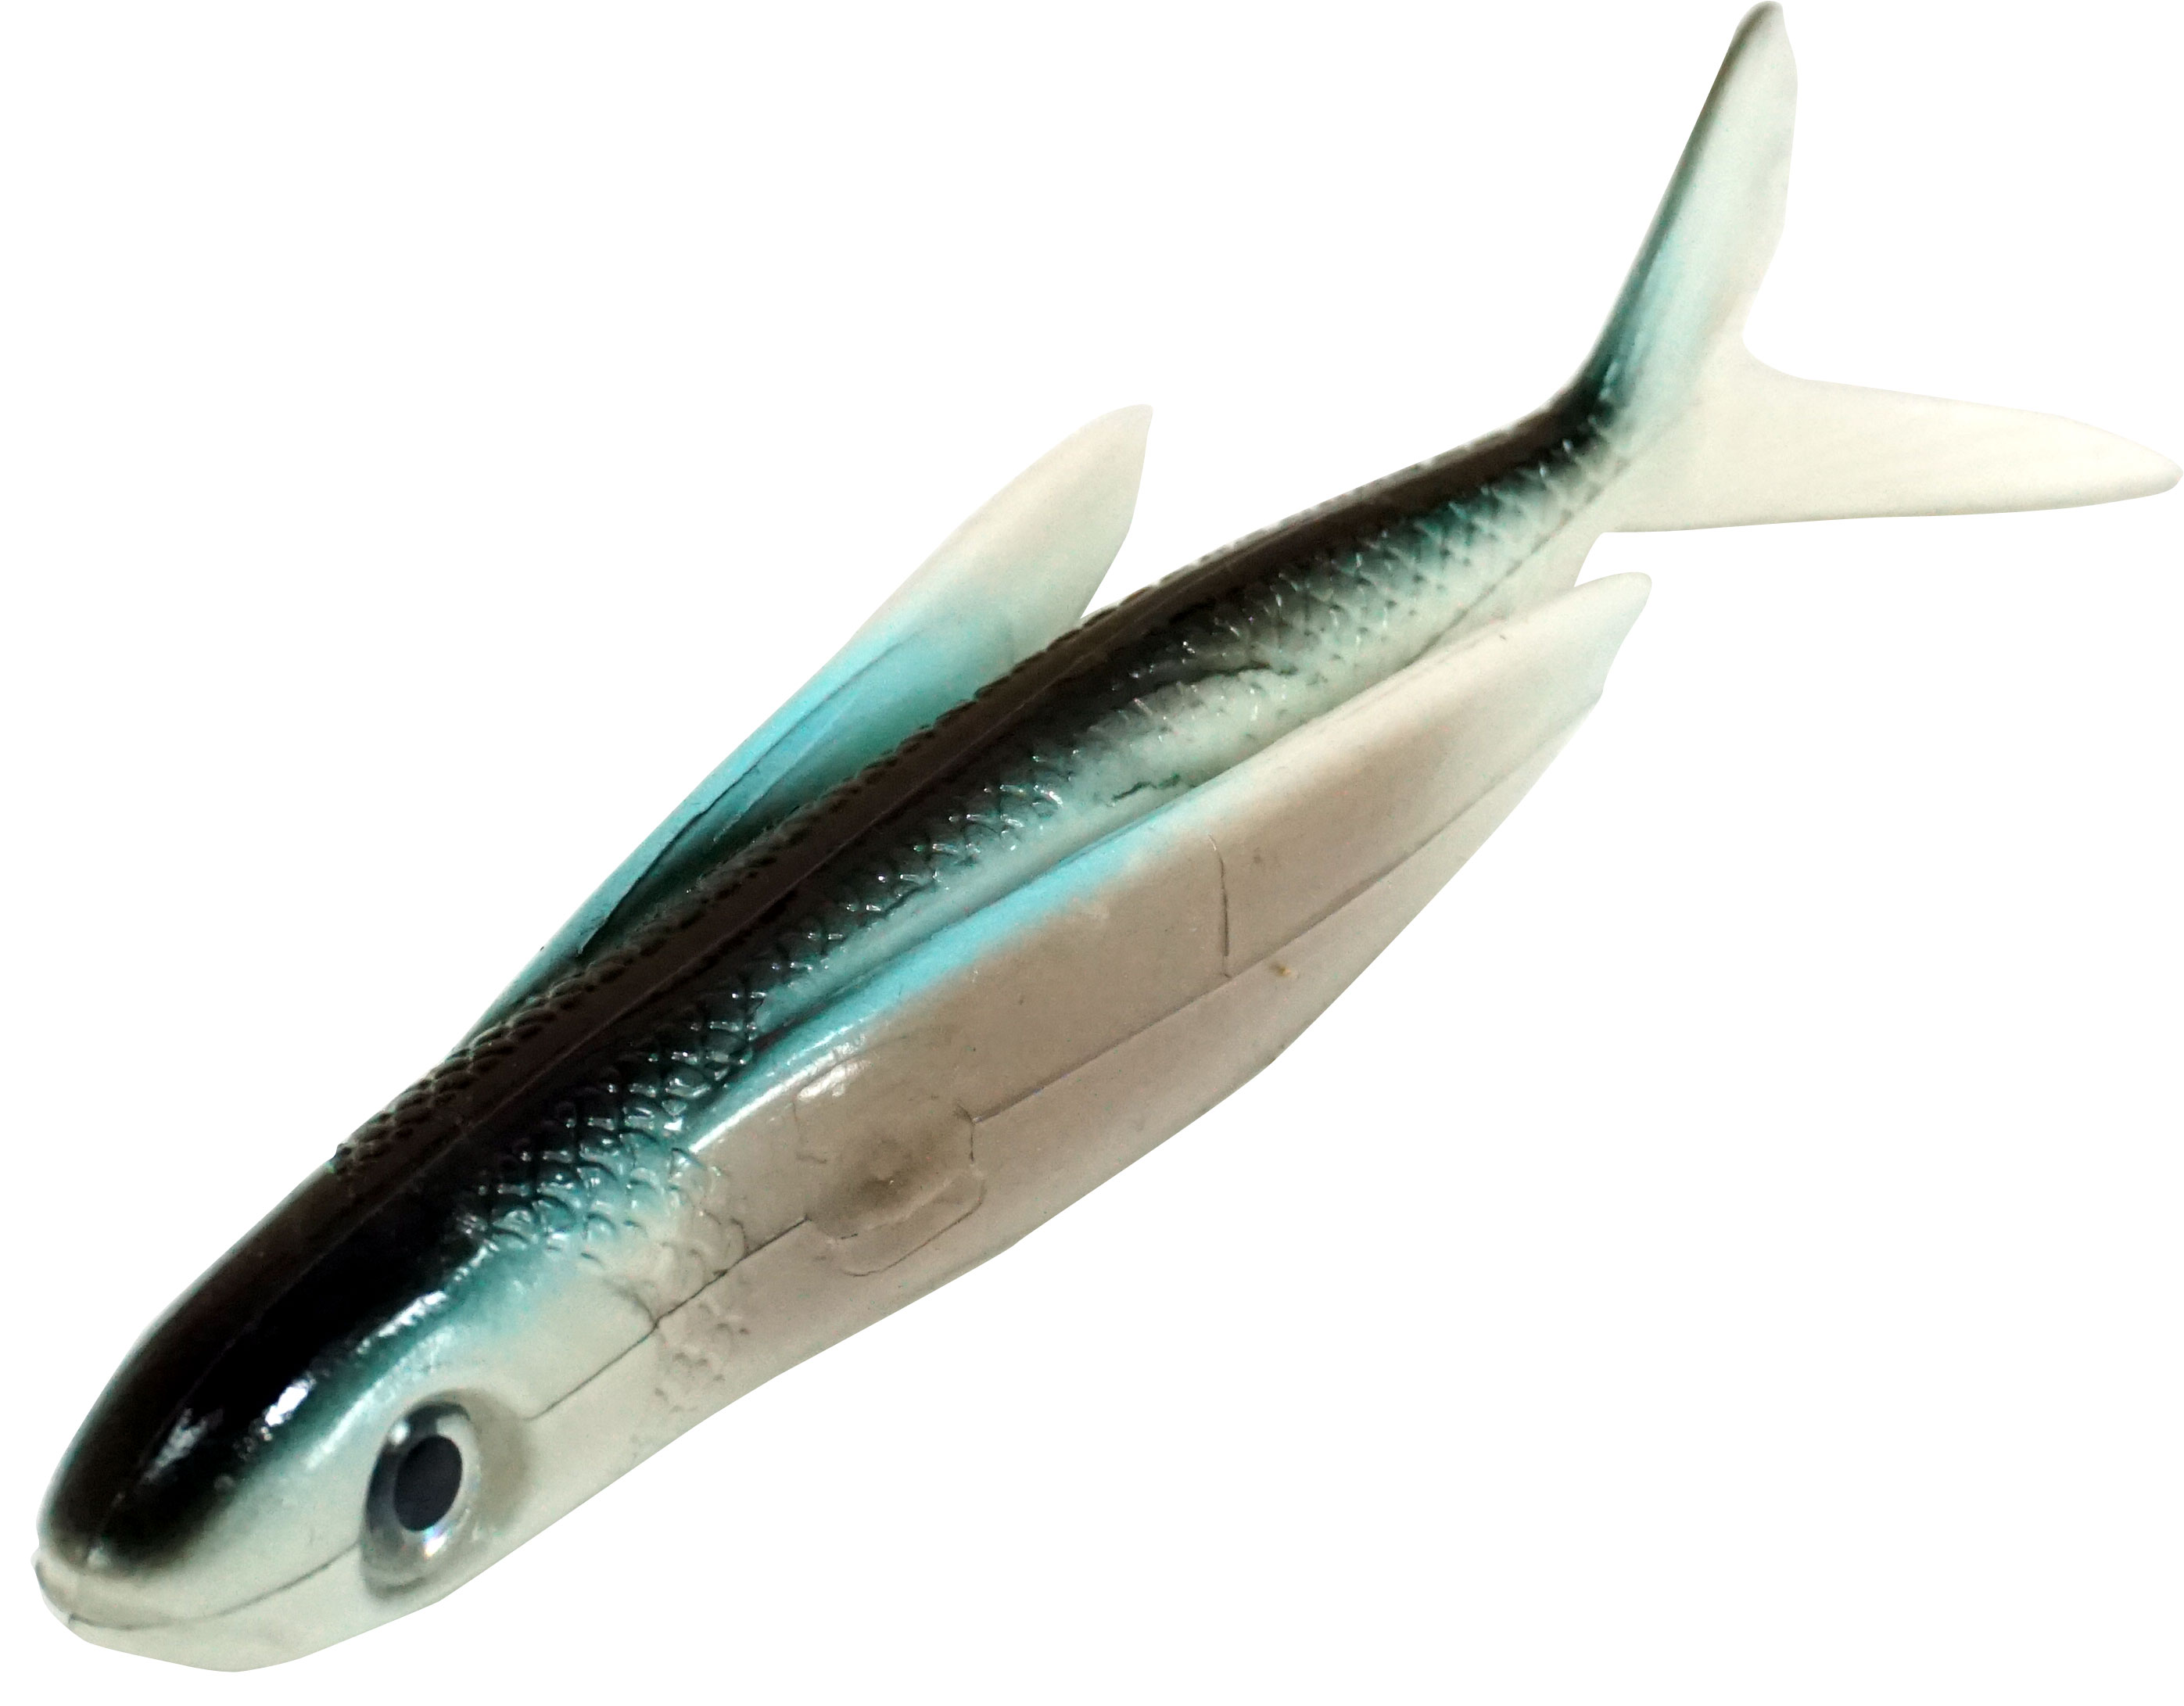 Flying Fish Lure (6 Inch)